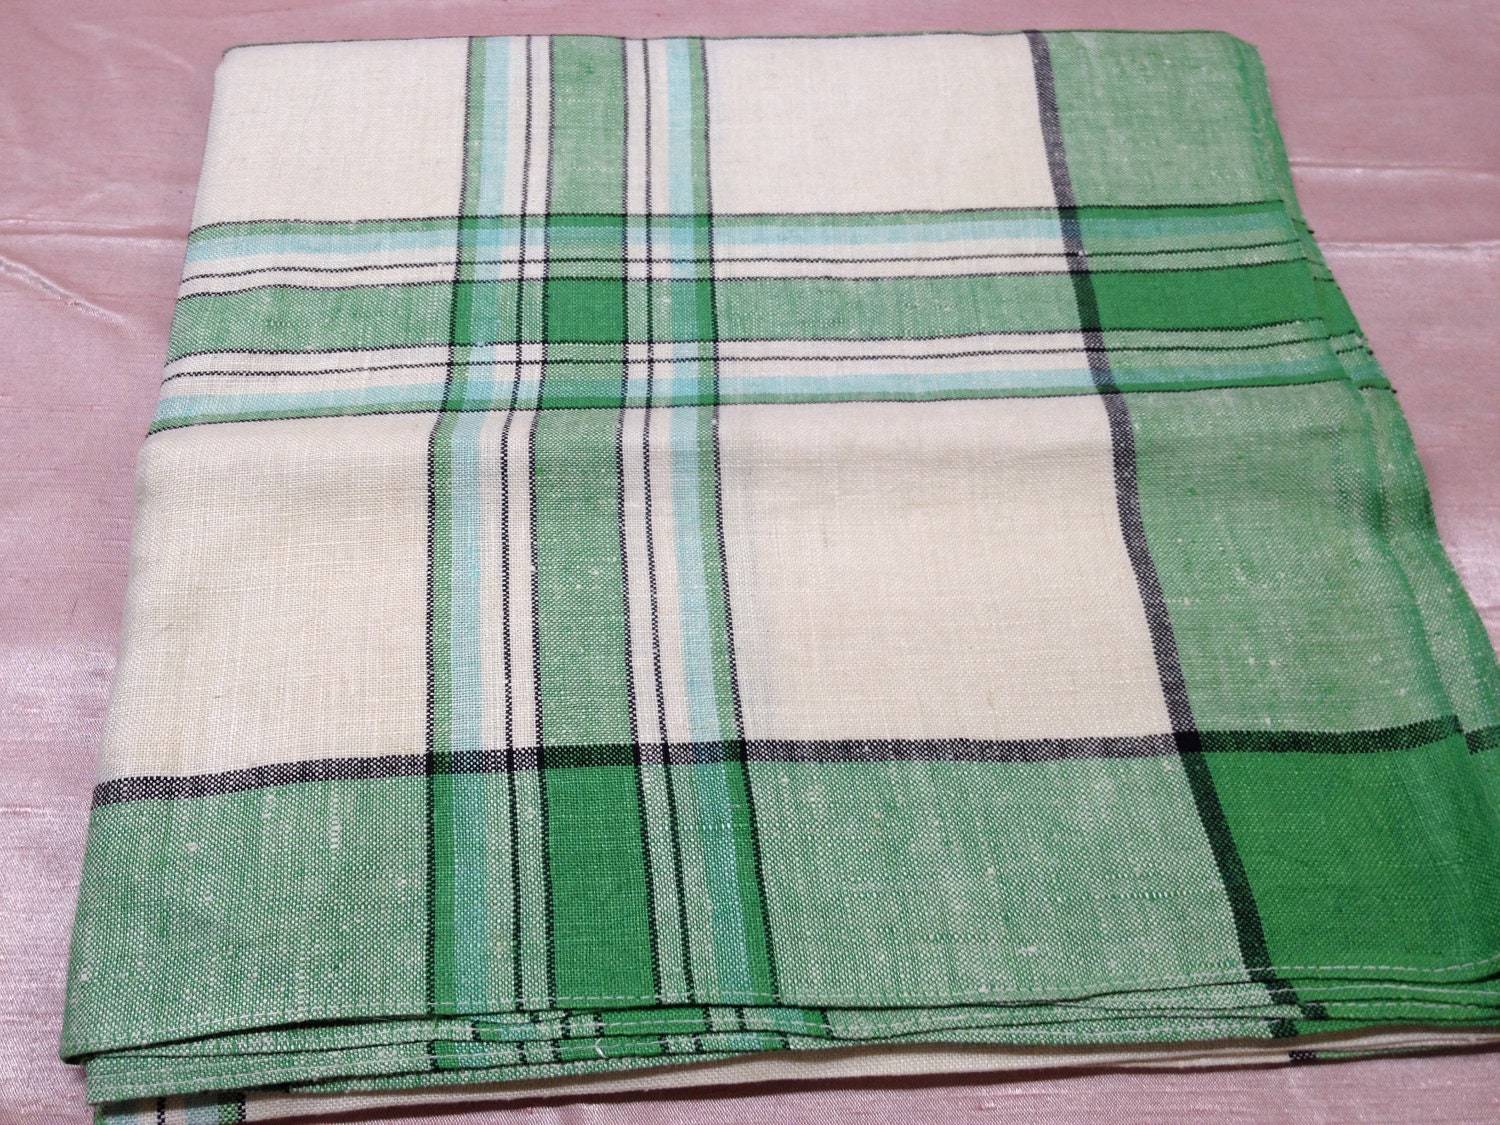 Green and Cream Plaid Tablecloth 1950s Linen 49 x by MillsVintage